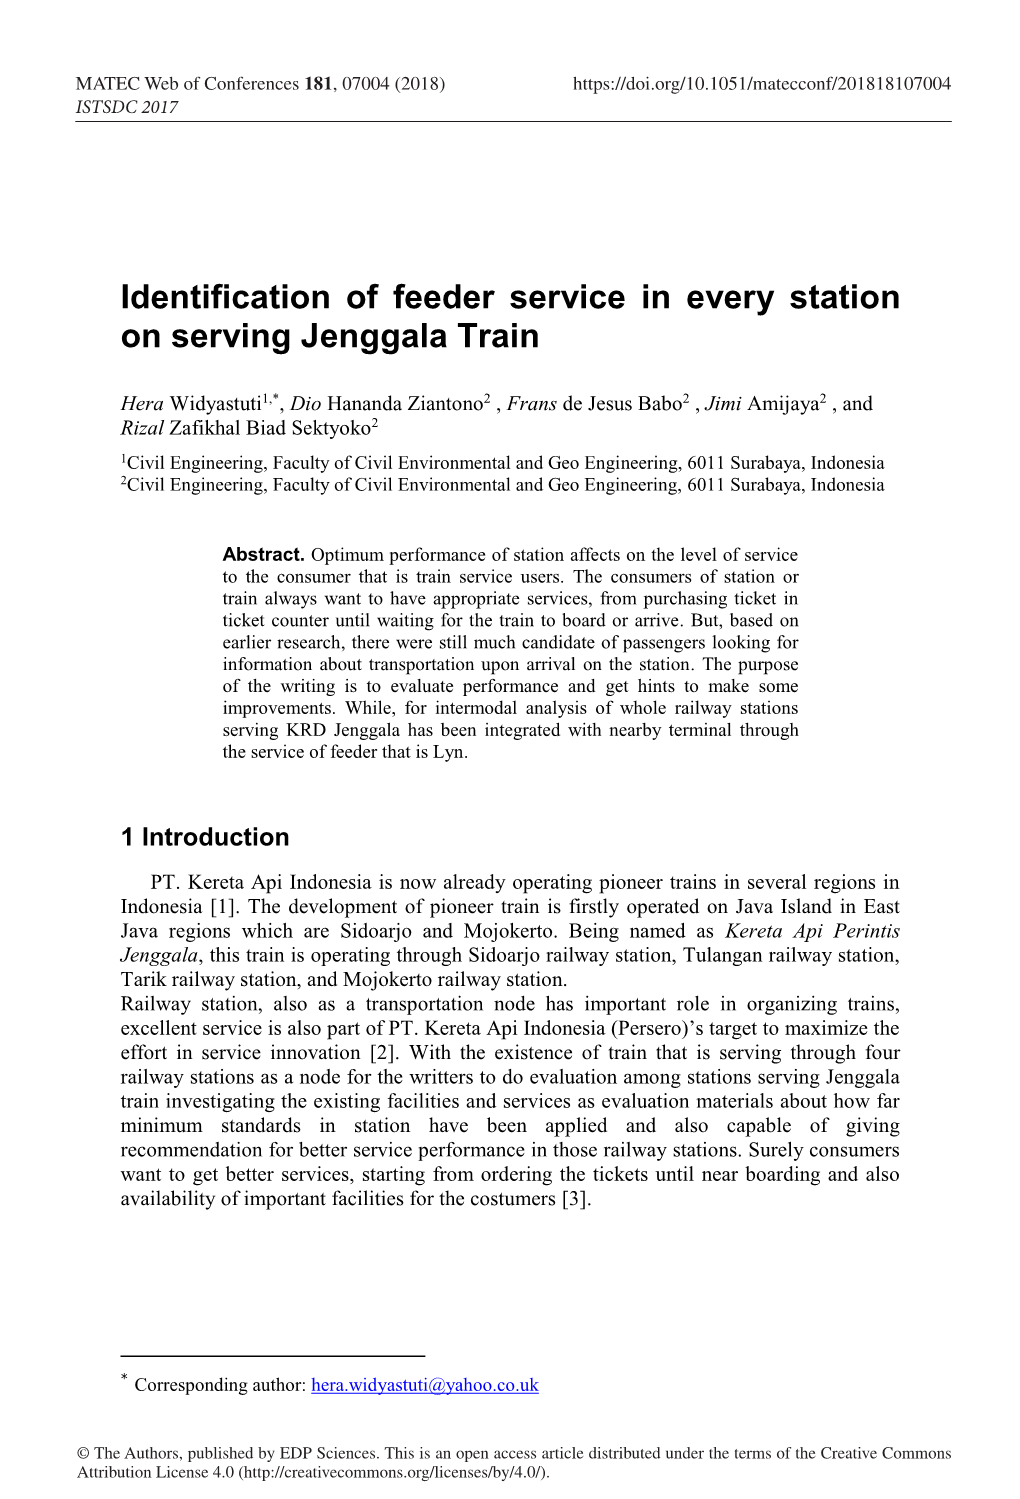 Identification of Feeder Service in Every Station on Serving Jenggala Train